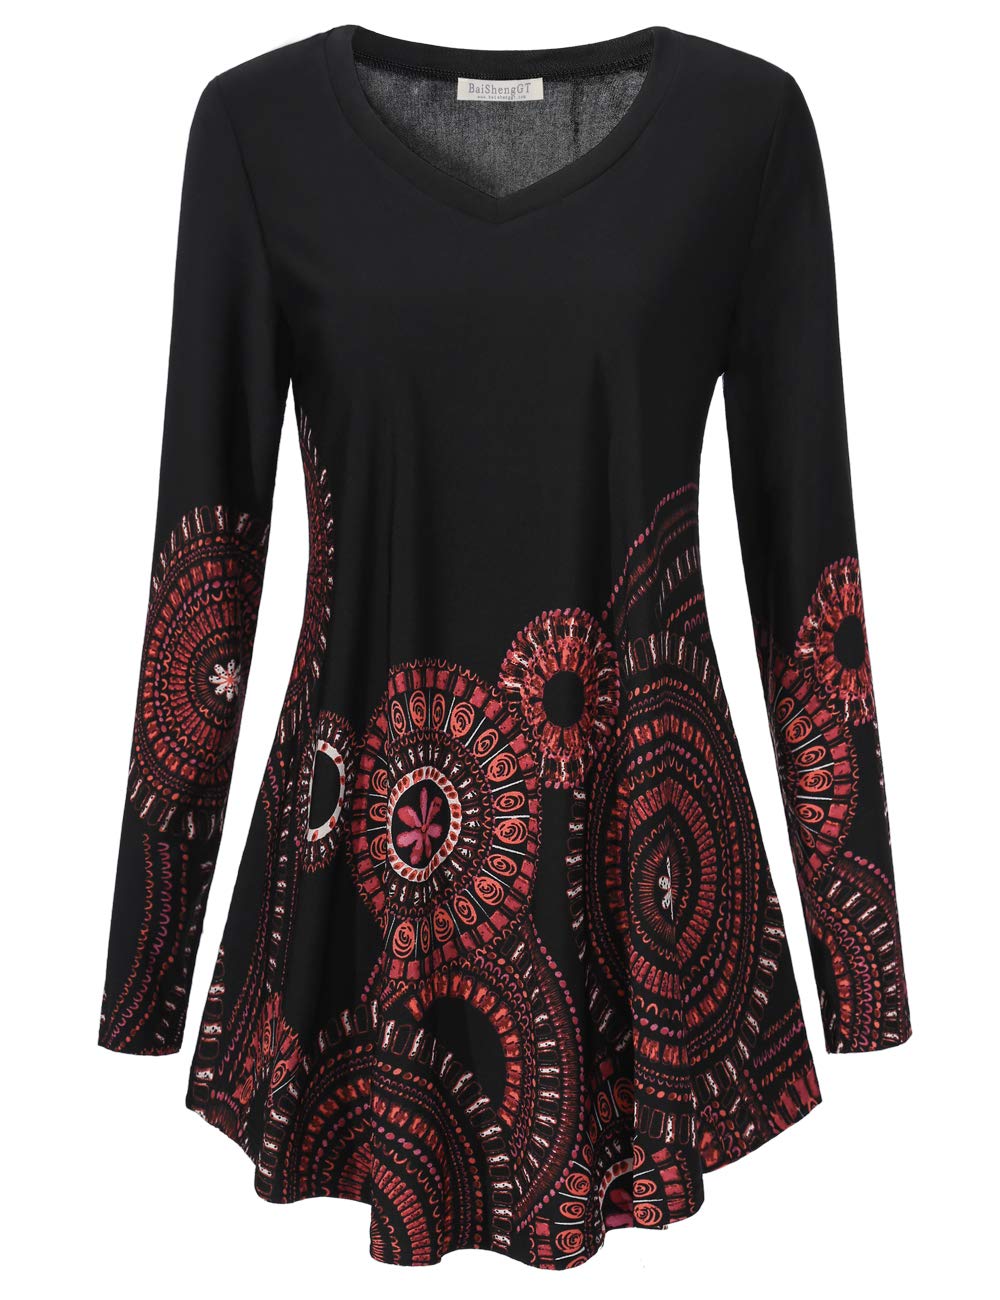 BAISHENGGT Red Circle Floral Women's Long Sleeve Tunic Tops for Leggin